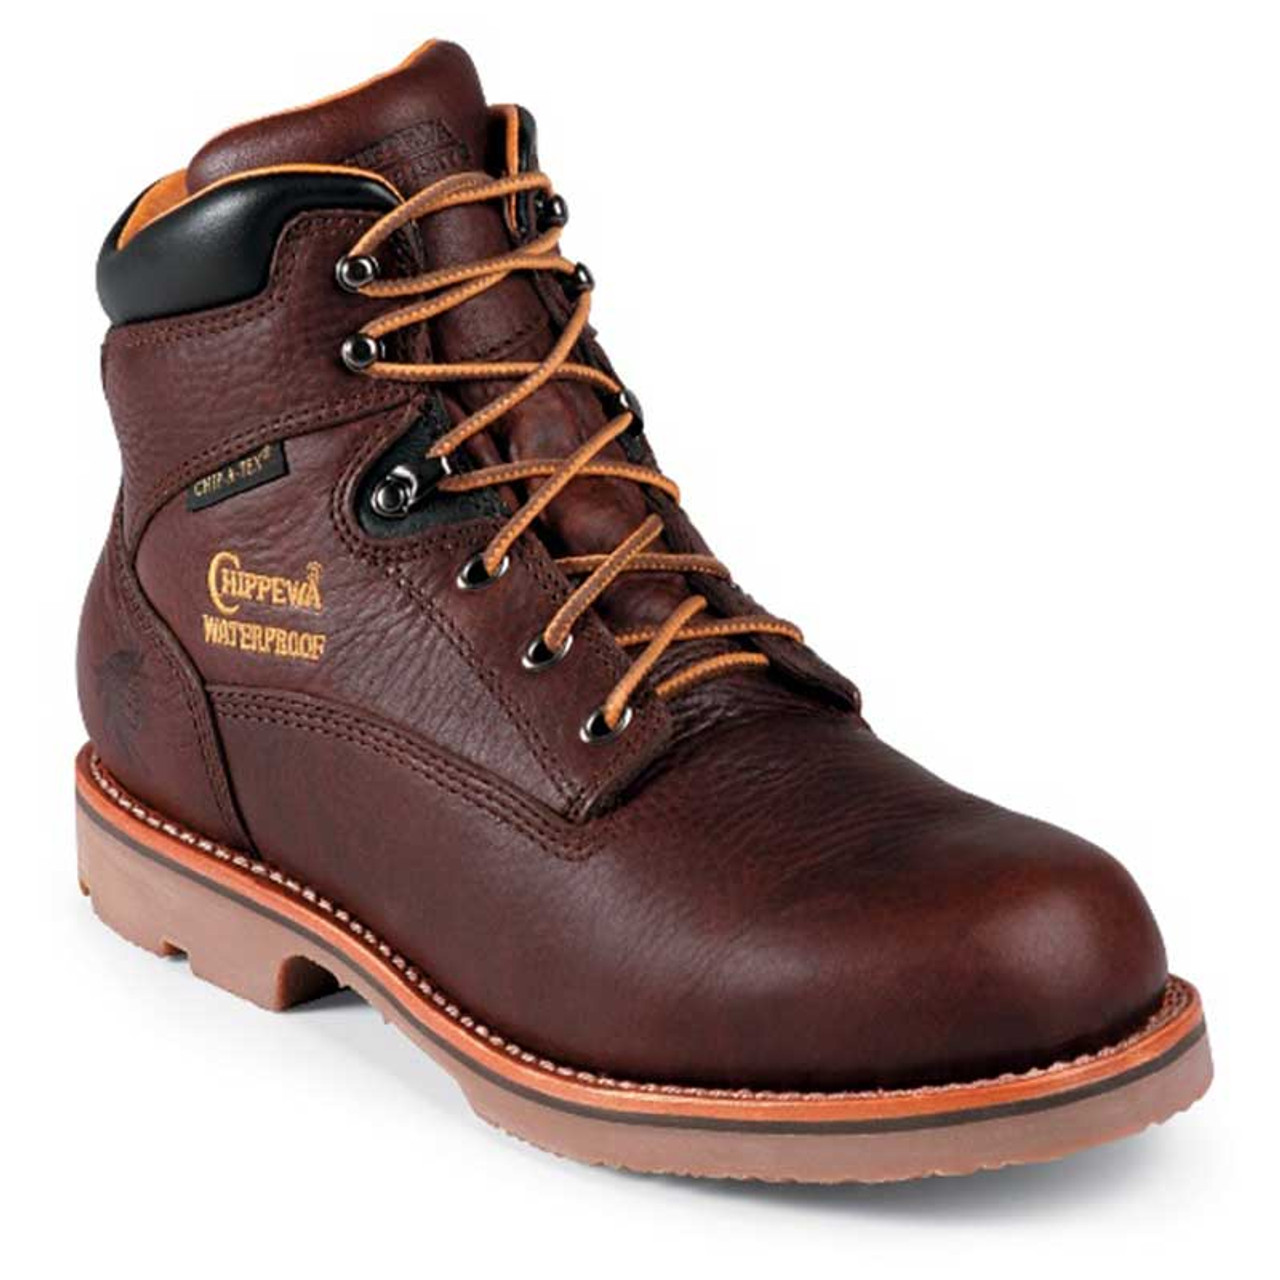 Chippewa 72125 COLVILLE Soft Toe 400g Insulated Briar Oiled Work Boots